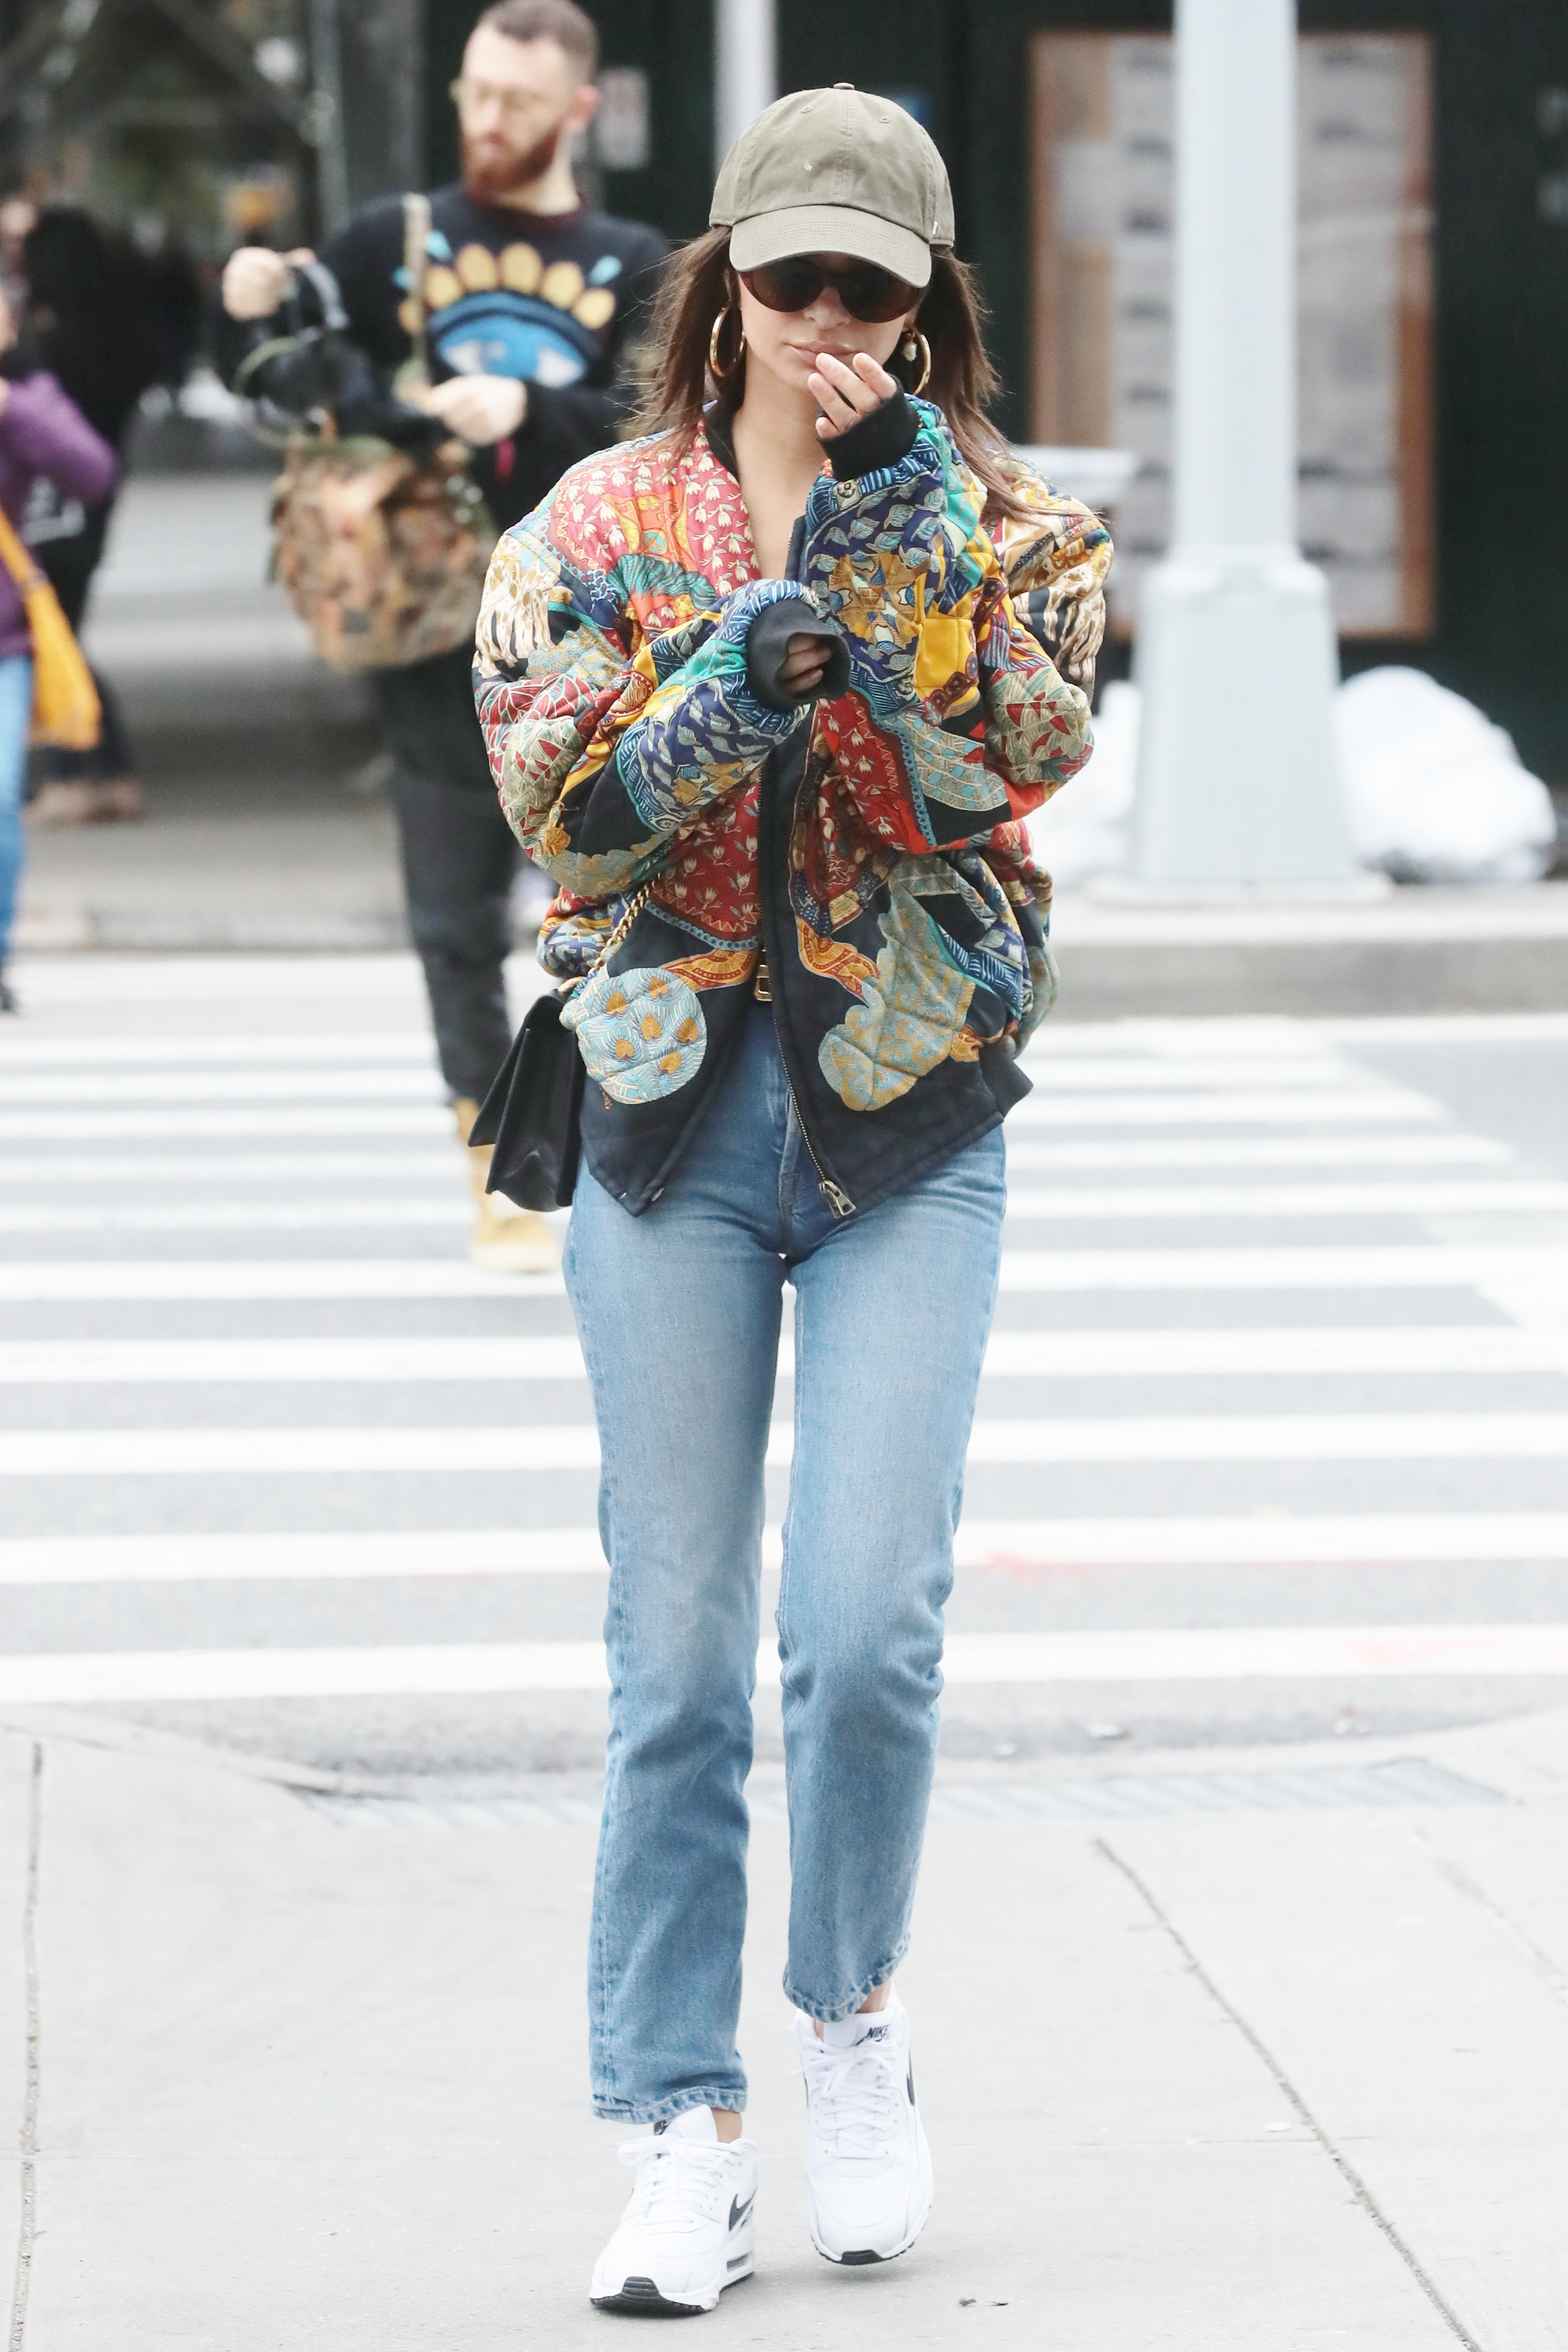 Model Emily Ratajkowski wearing jeans and a colorful top walking down a sidewalk in 2019. 